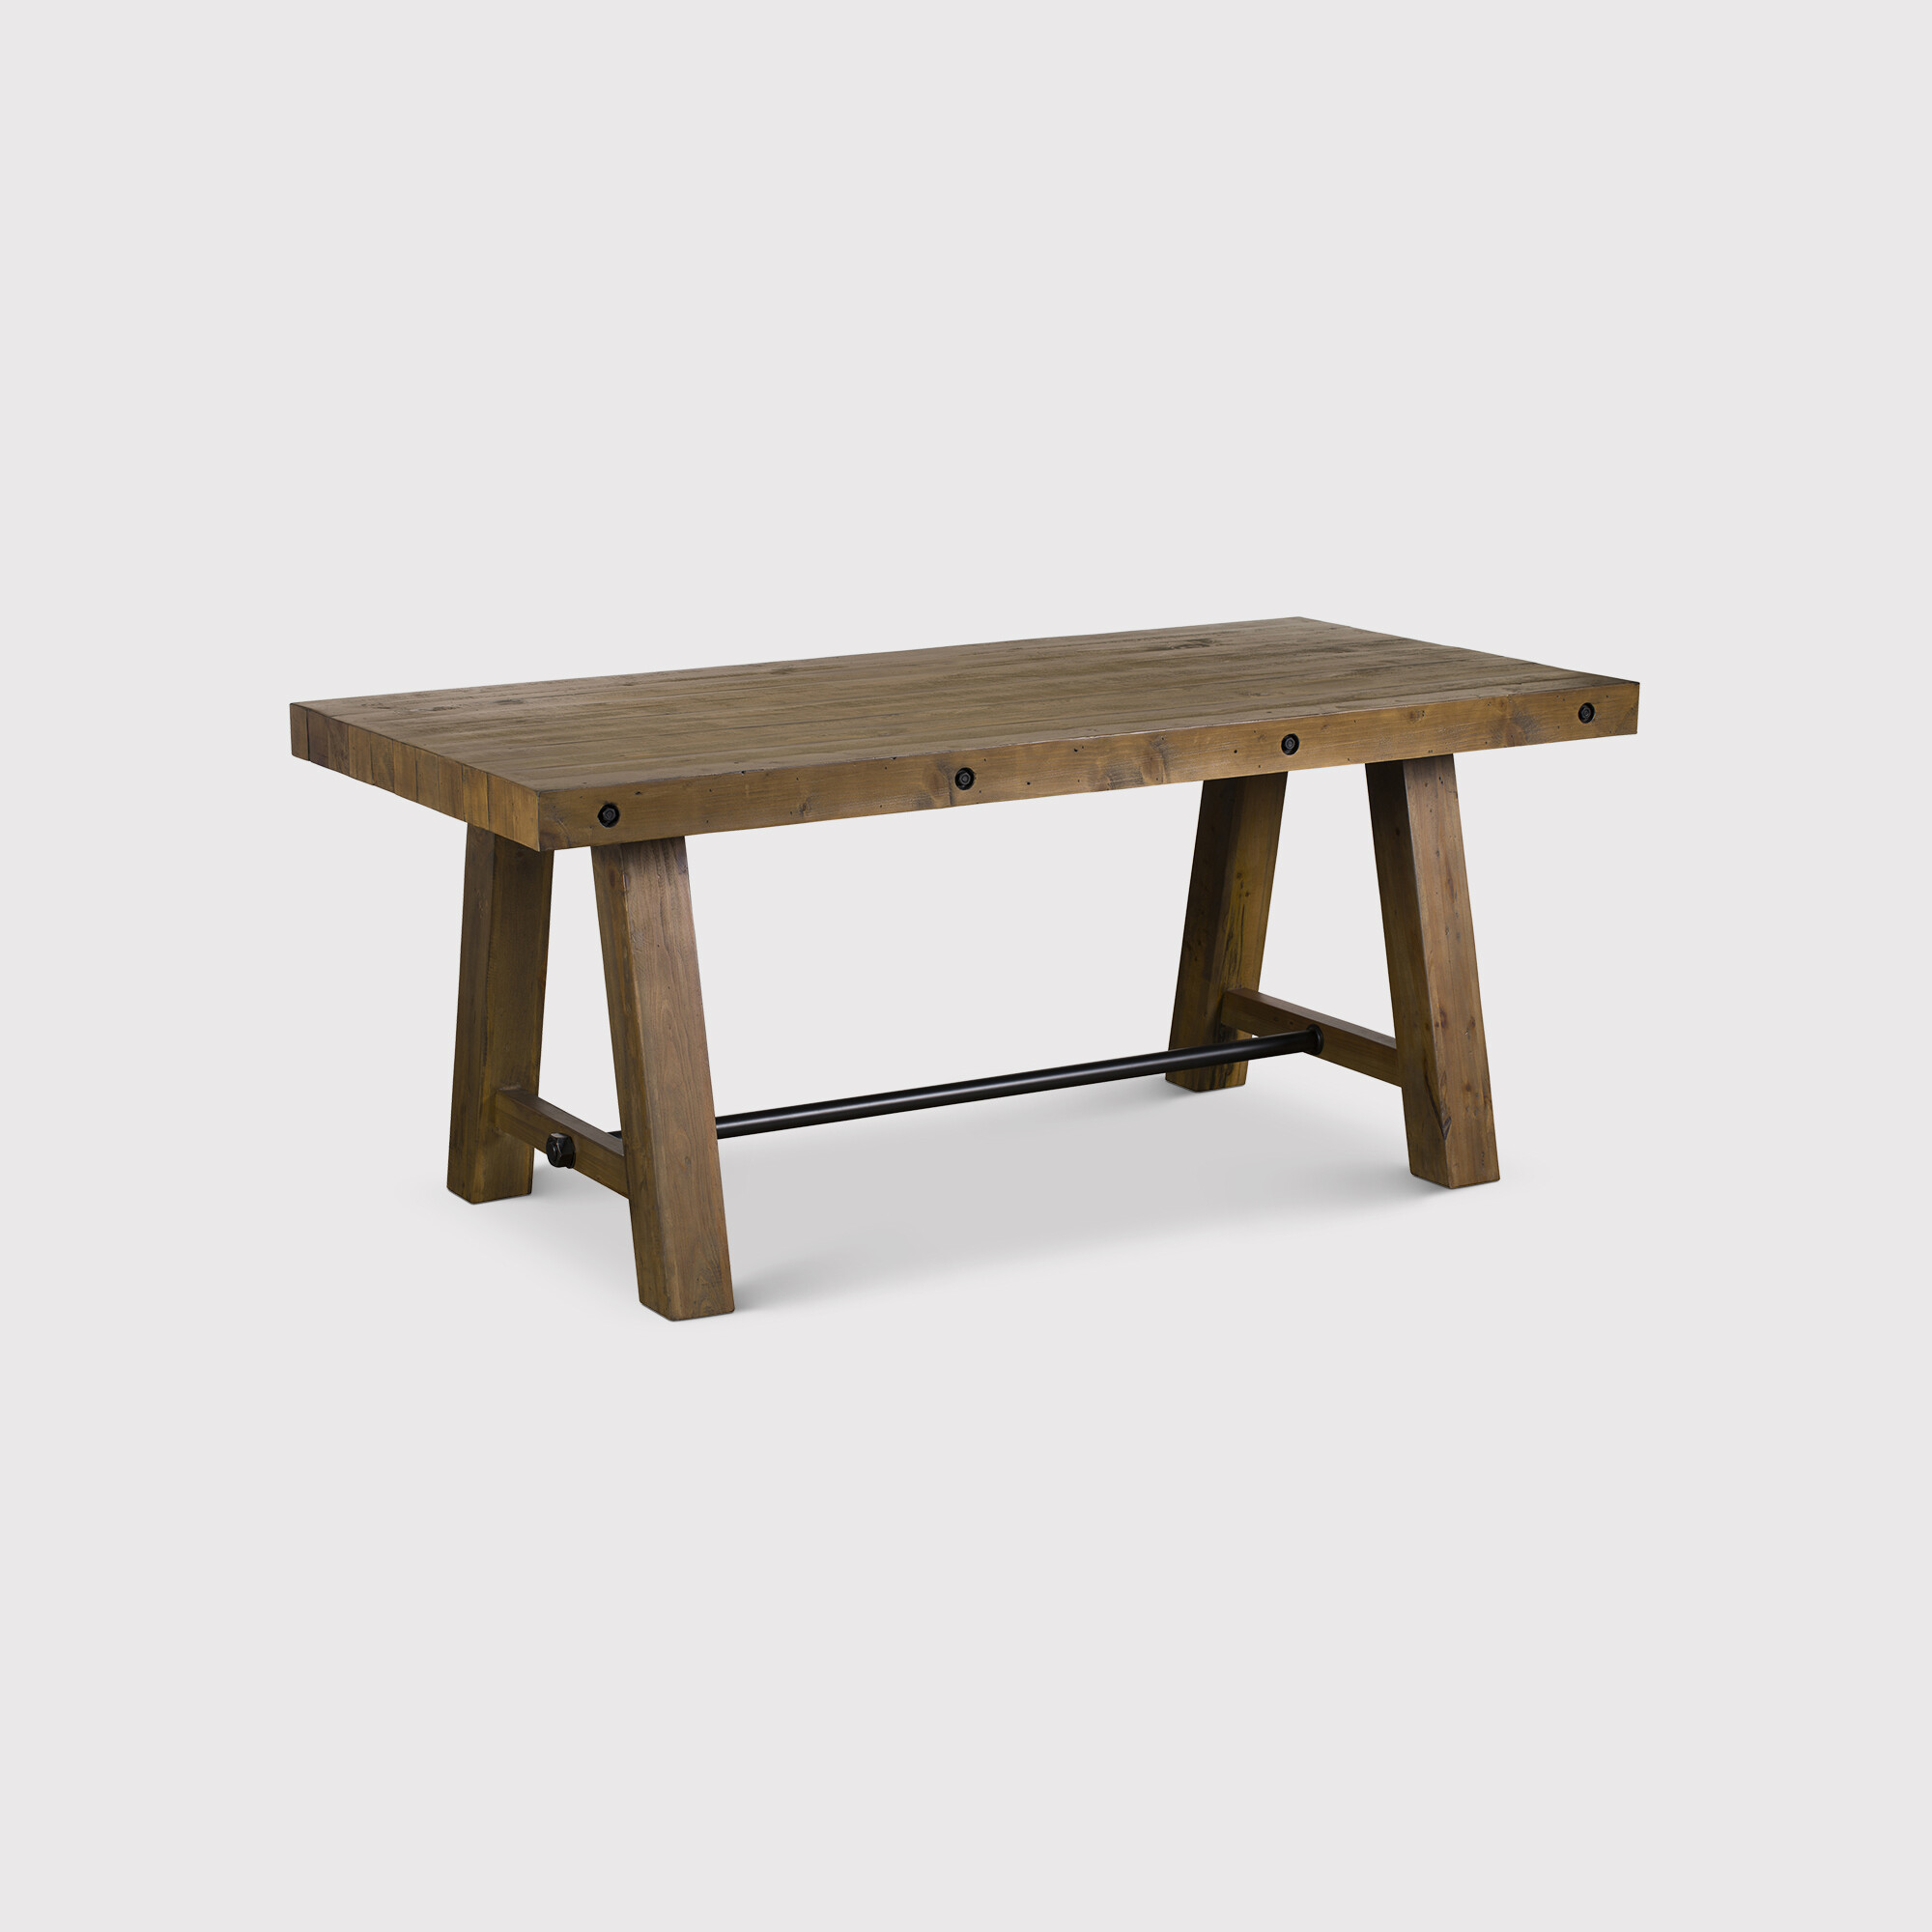 Napier 220cm Dining Table, Brown | Barker & Stonehouse